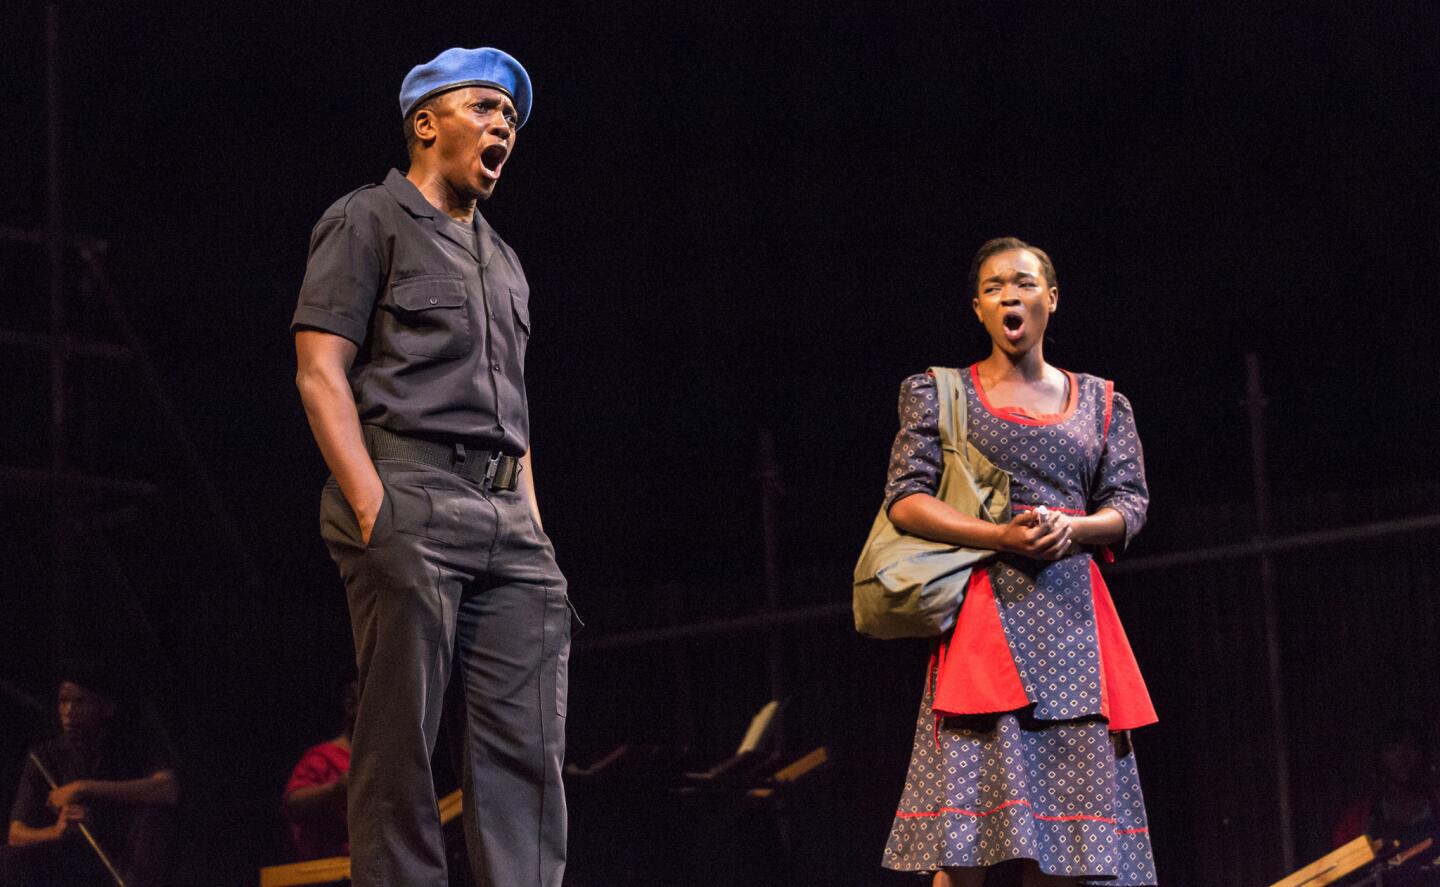 Cape Town Opera Company Brings Carmen to Broad Stage